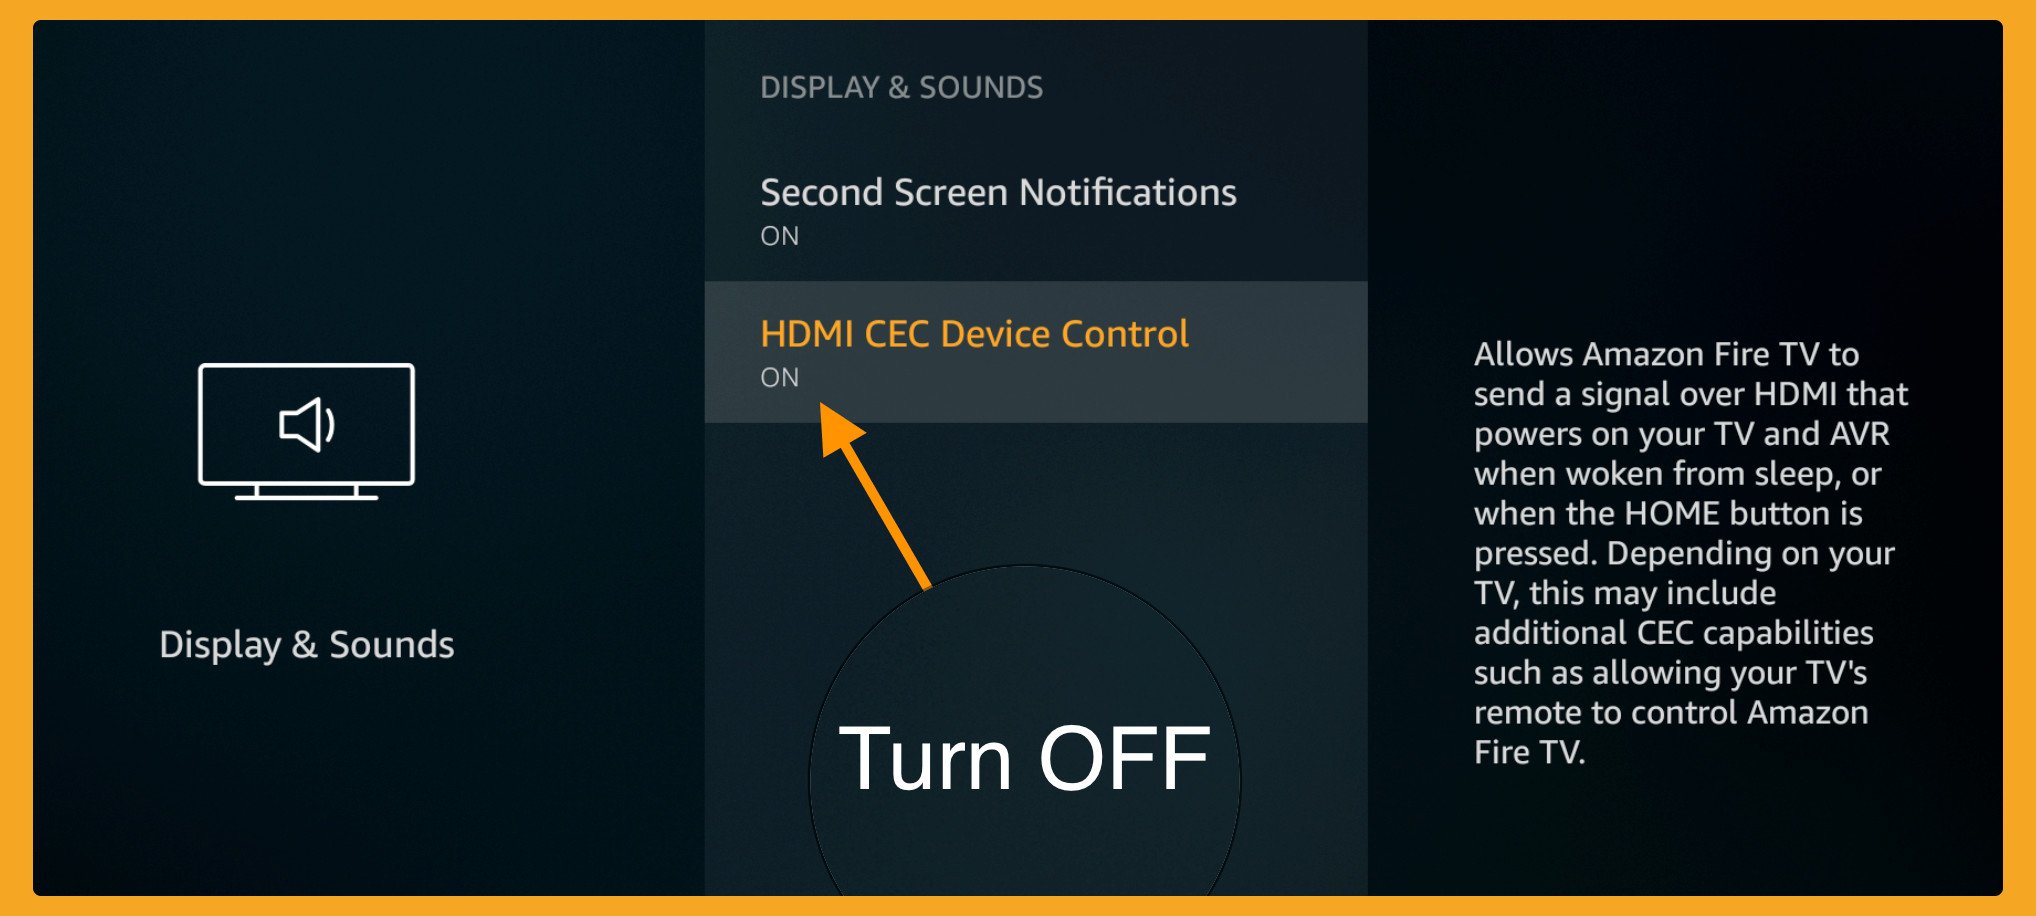 HDMI-CEC-Device-Control-to-Fix-Firestick-rebooting-issue